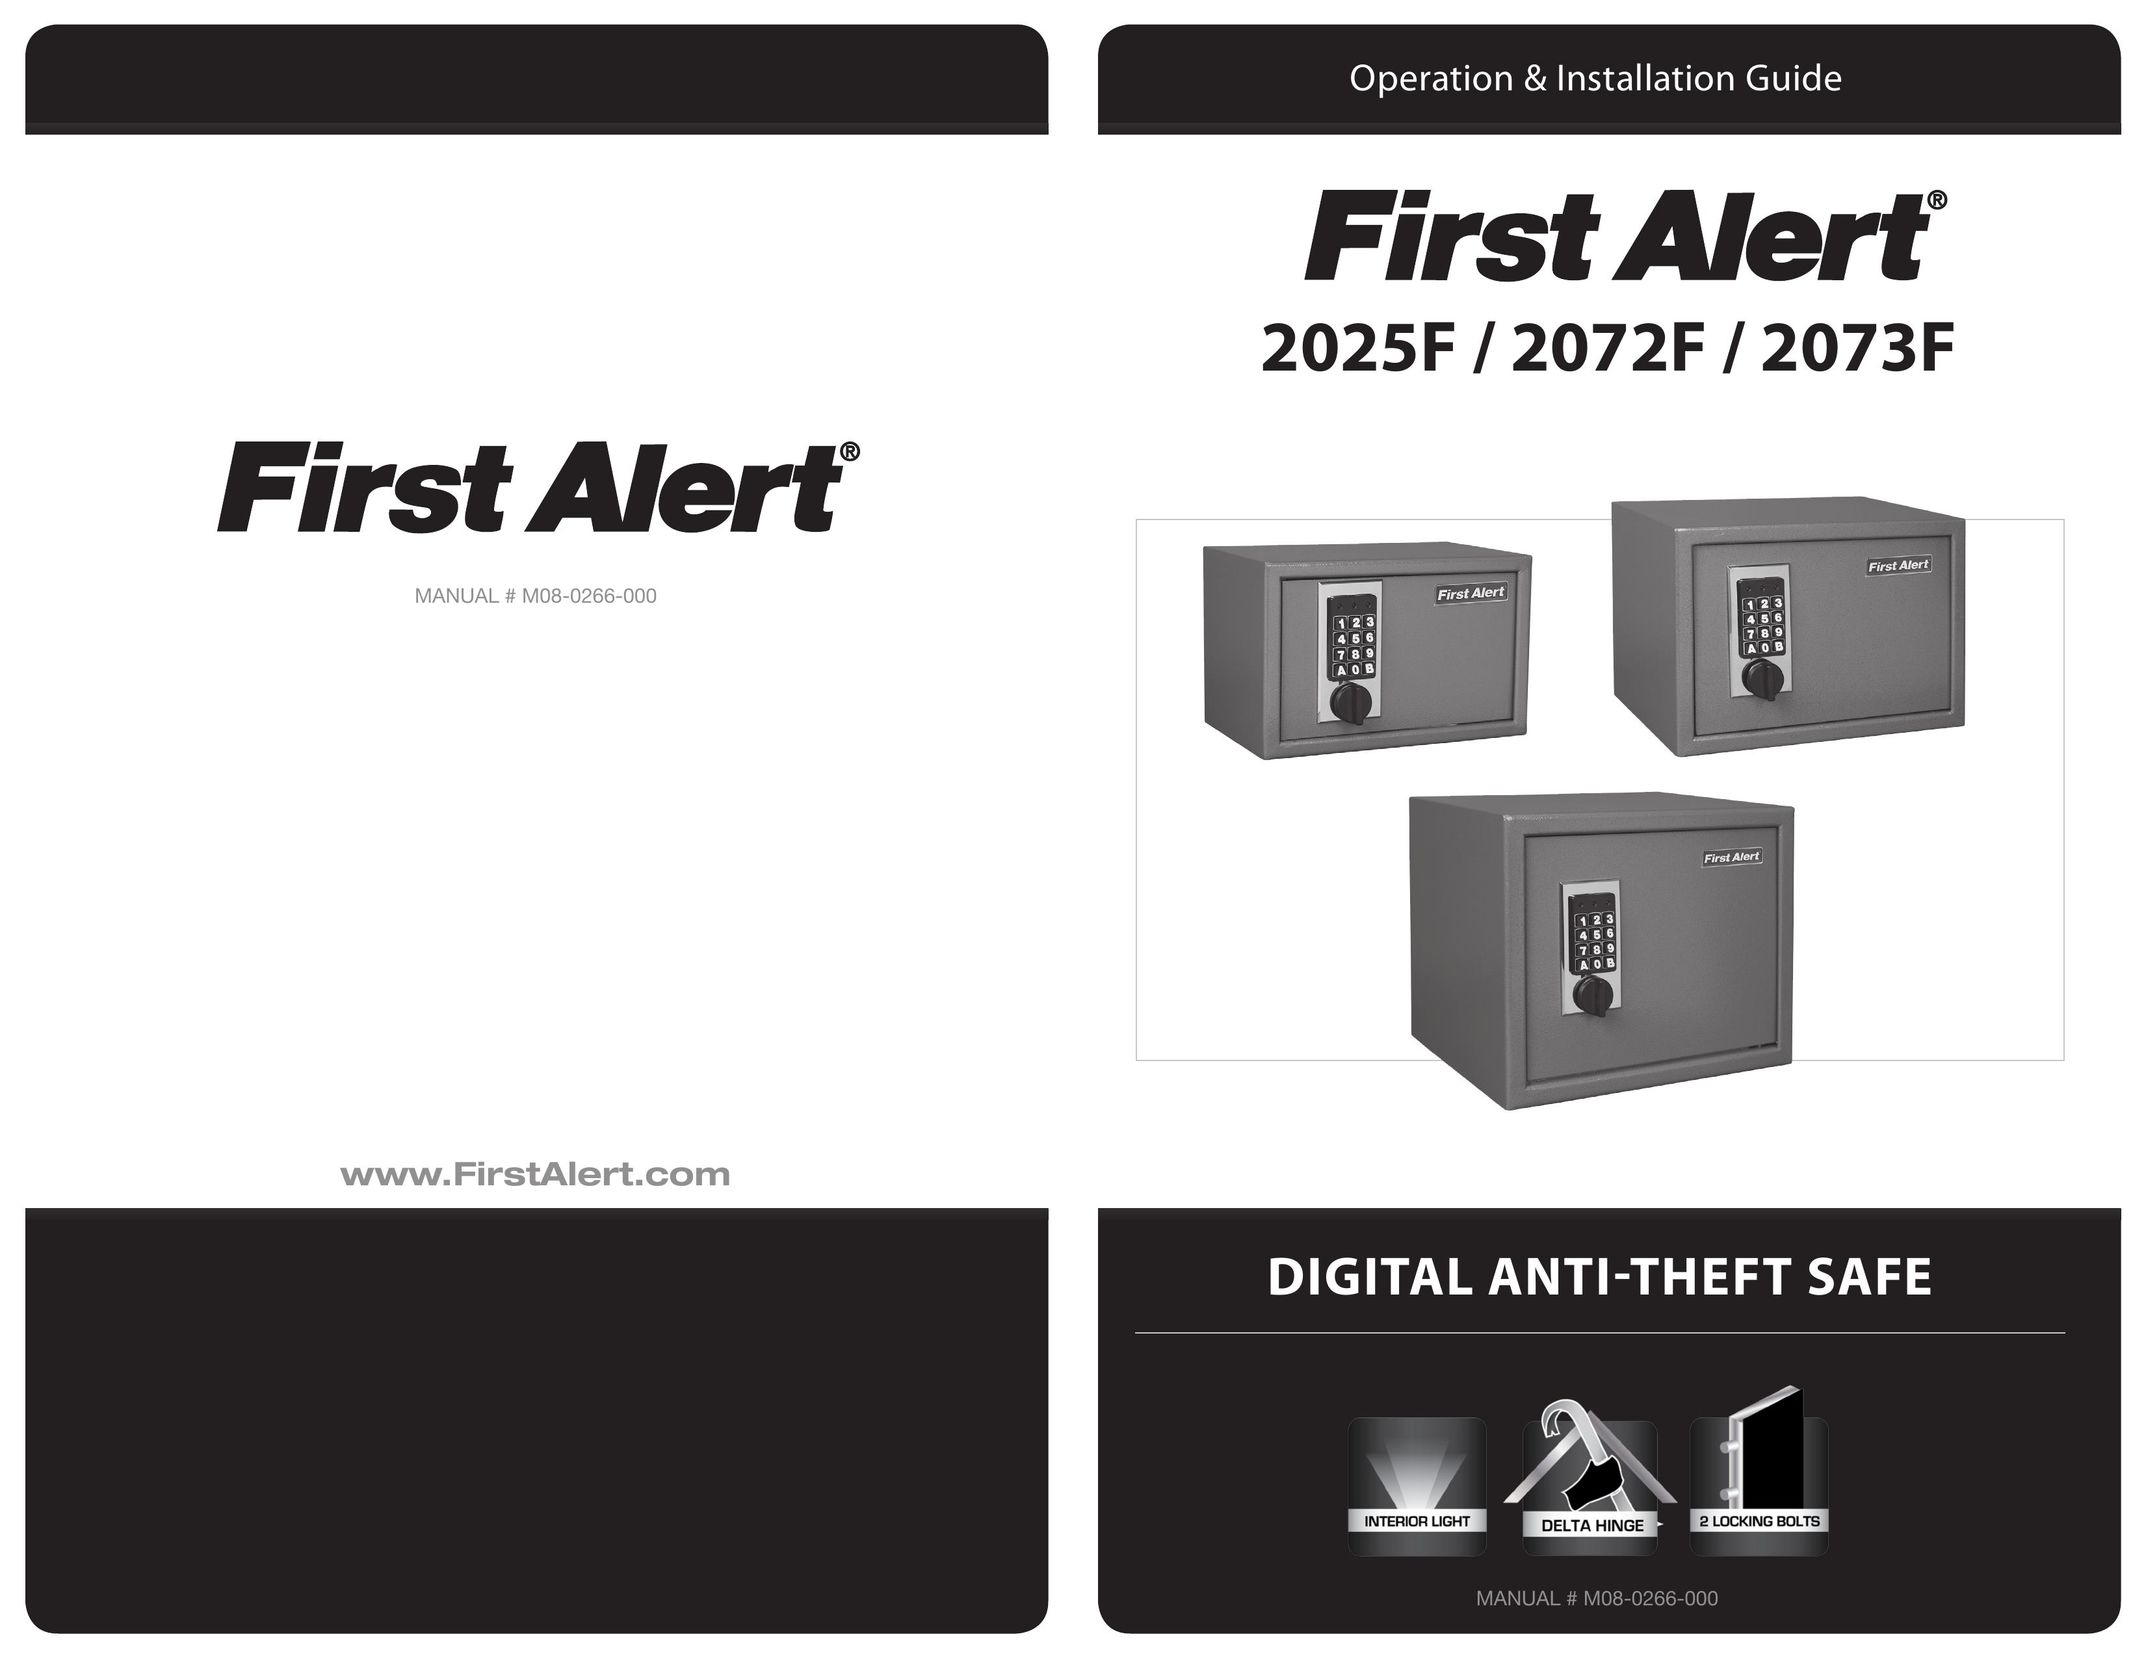 First Alert 2073F Home Safety Product User Manual